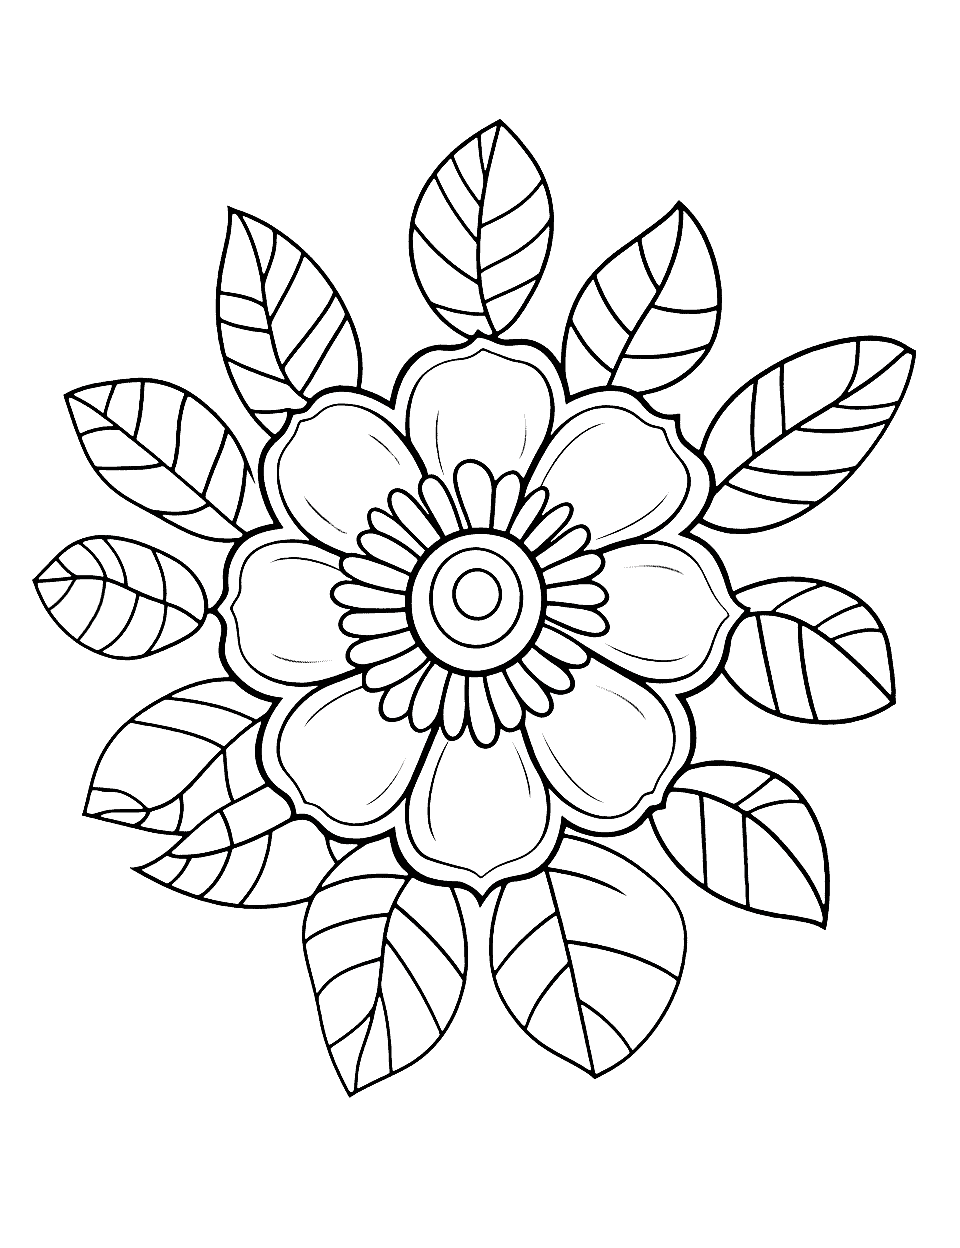 Floral Summer Mandala Flower Coloring Page - A mandala design filled with summer flowers for a bit of stress relief.